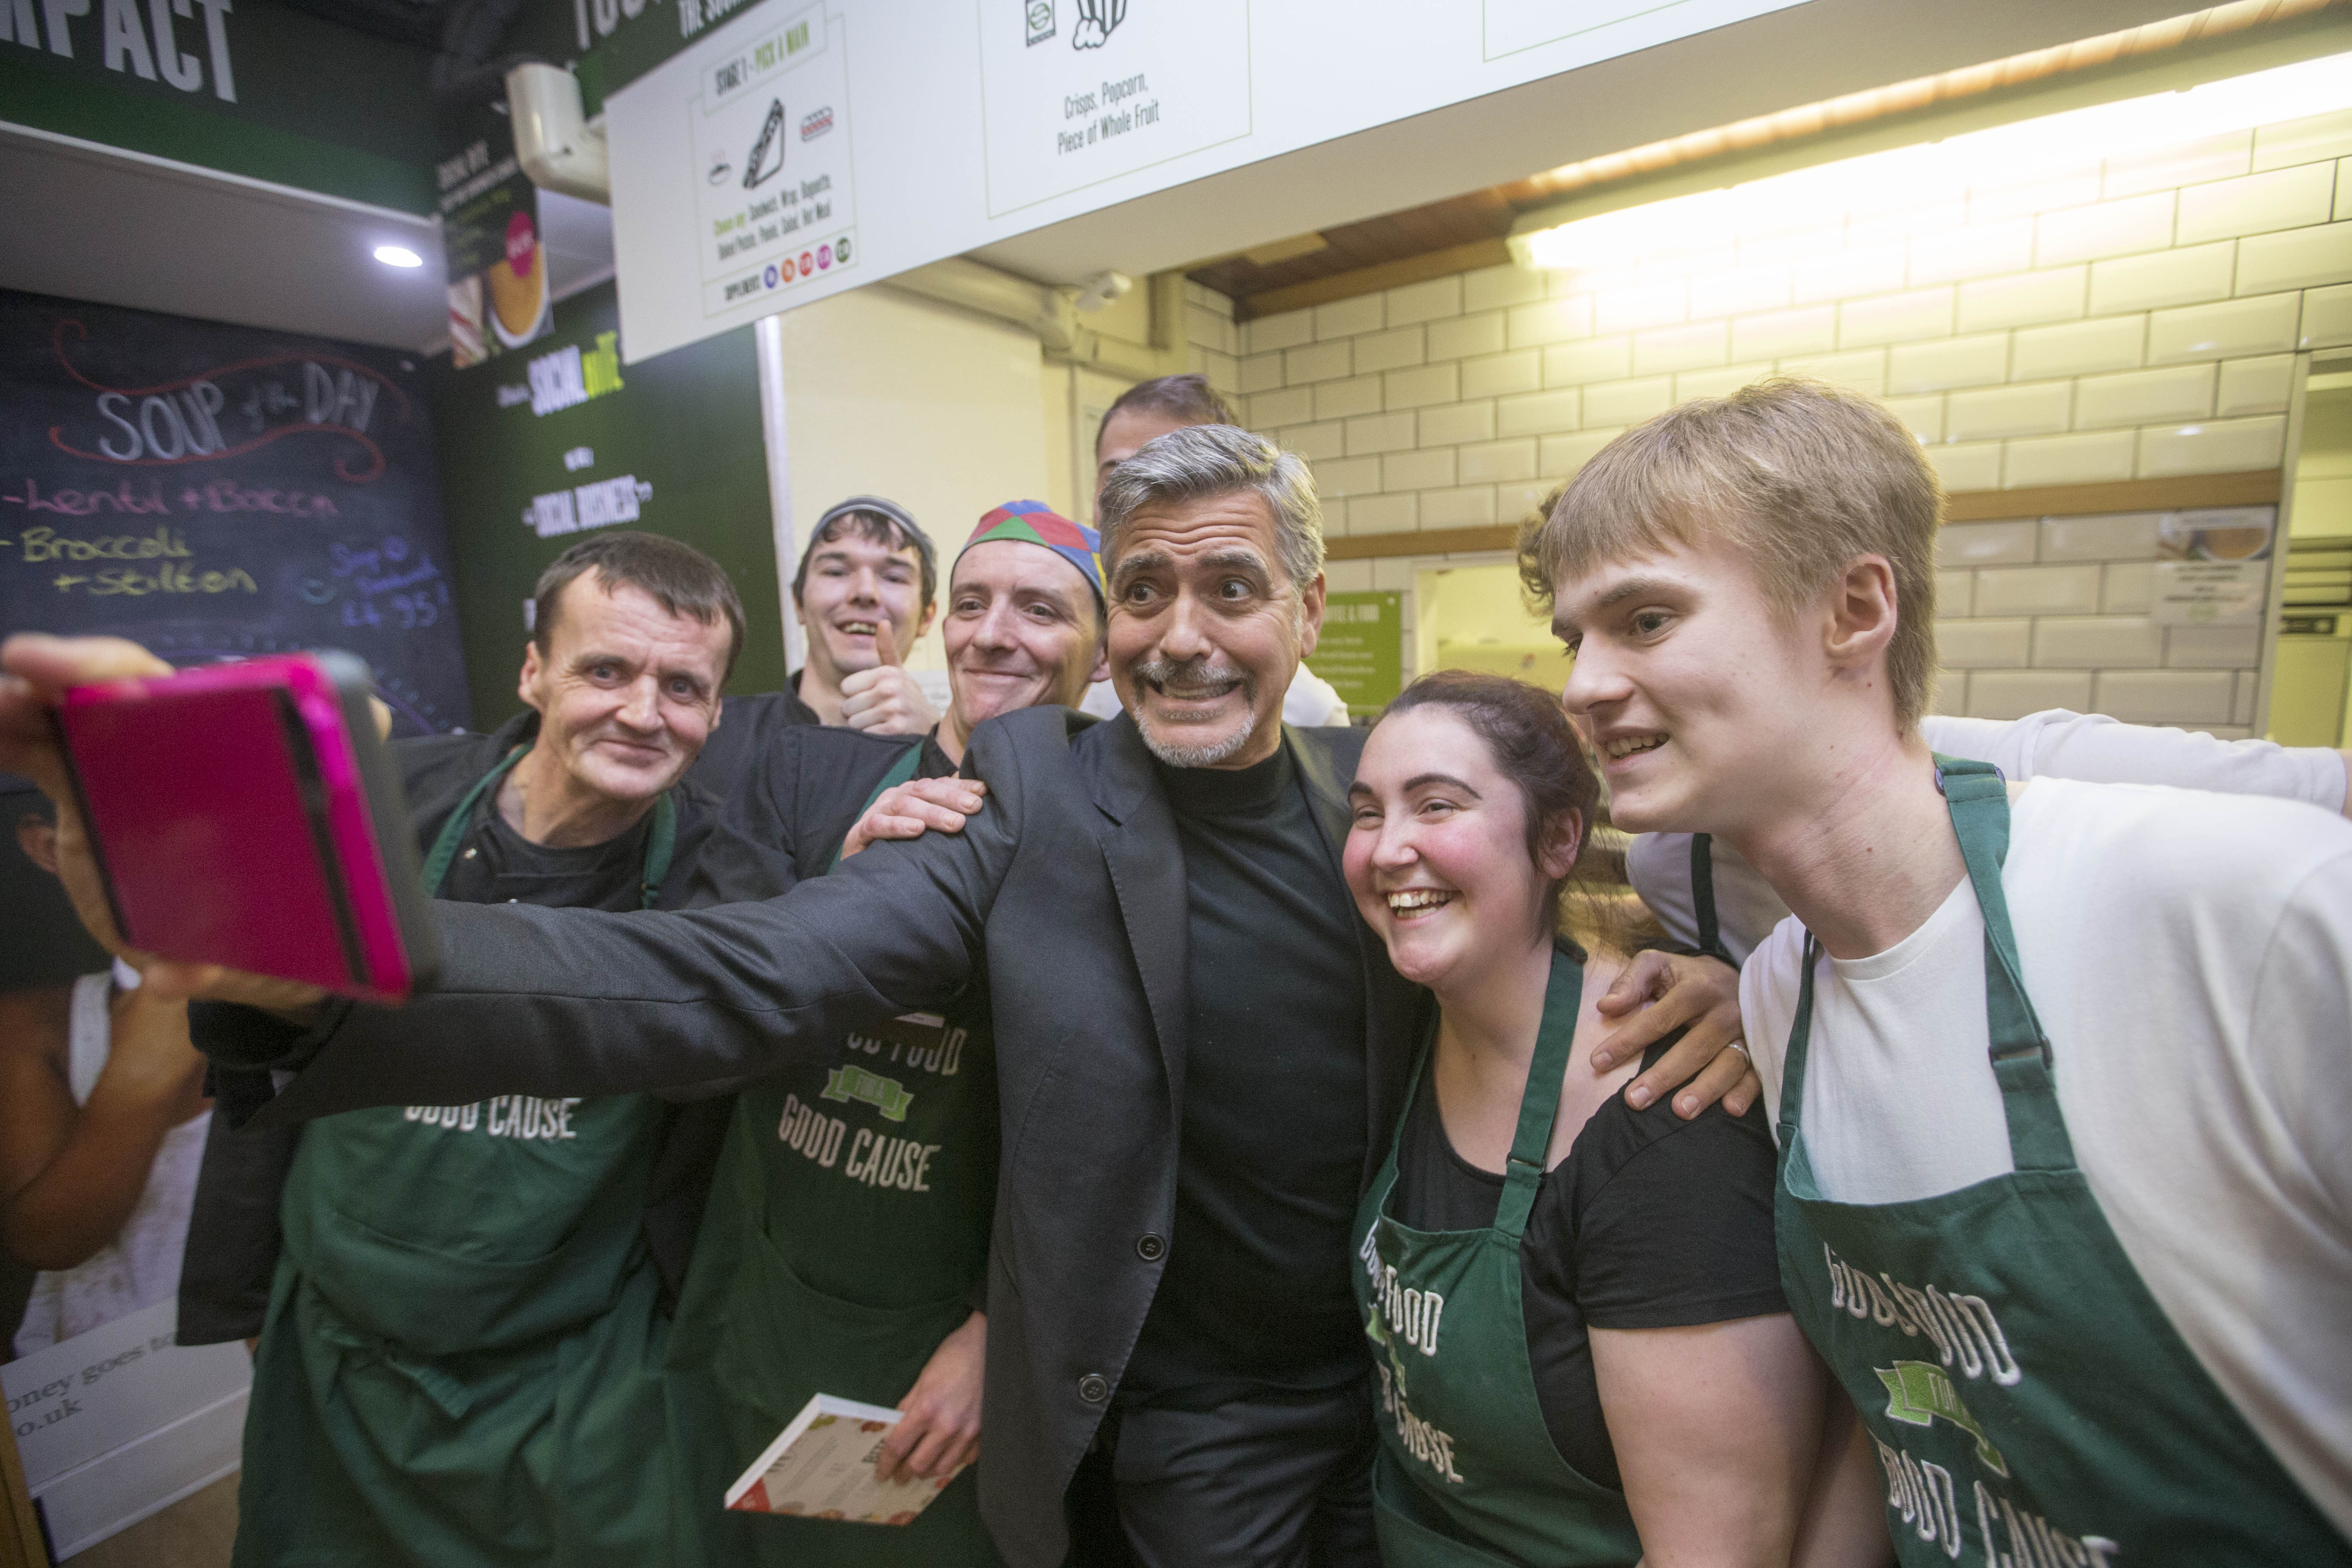 George Clooney visits Scottish sandwich shop, Social Bite, and buys meals for local homeless people